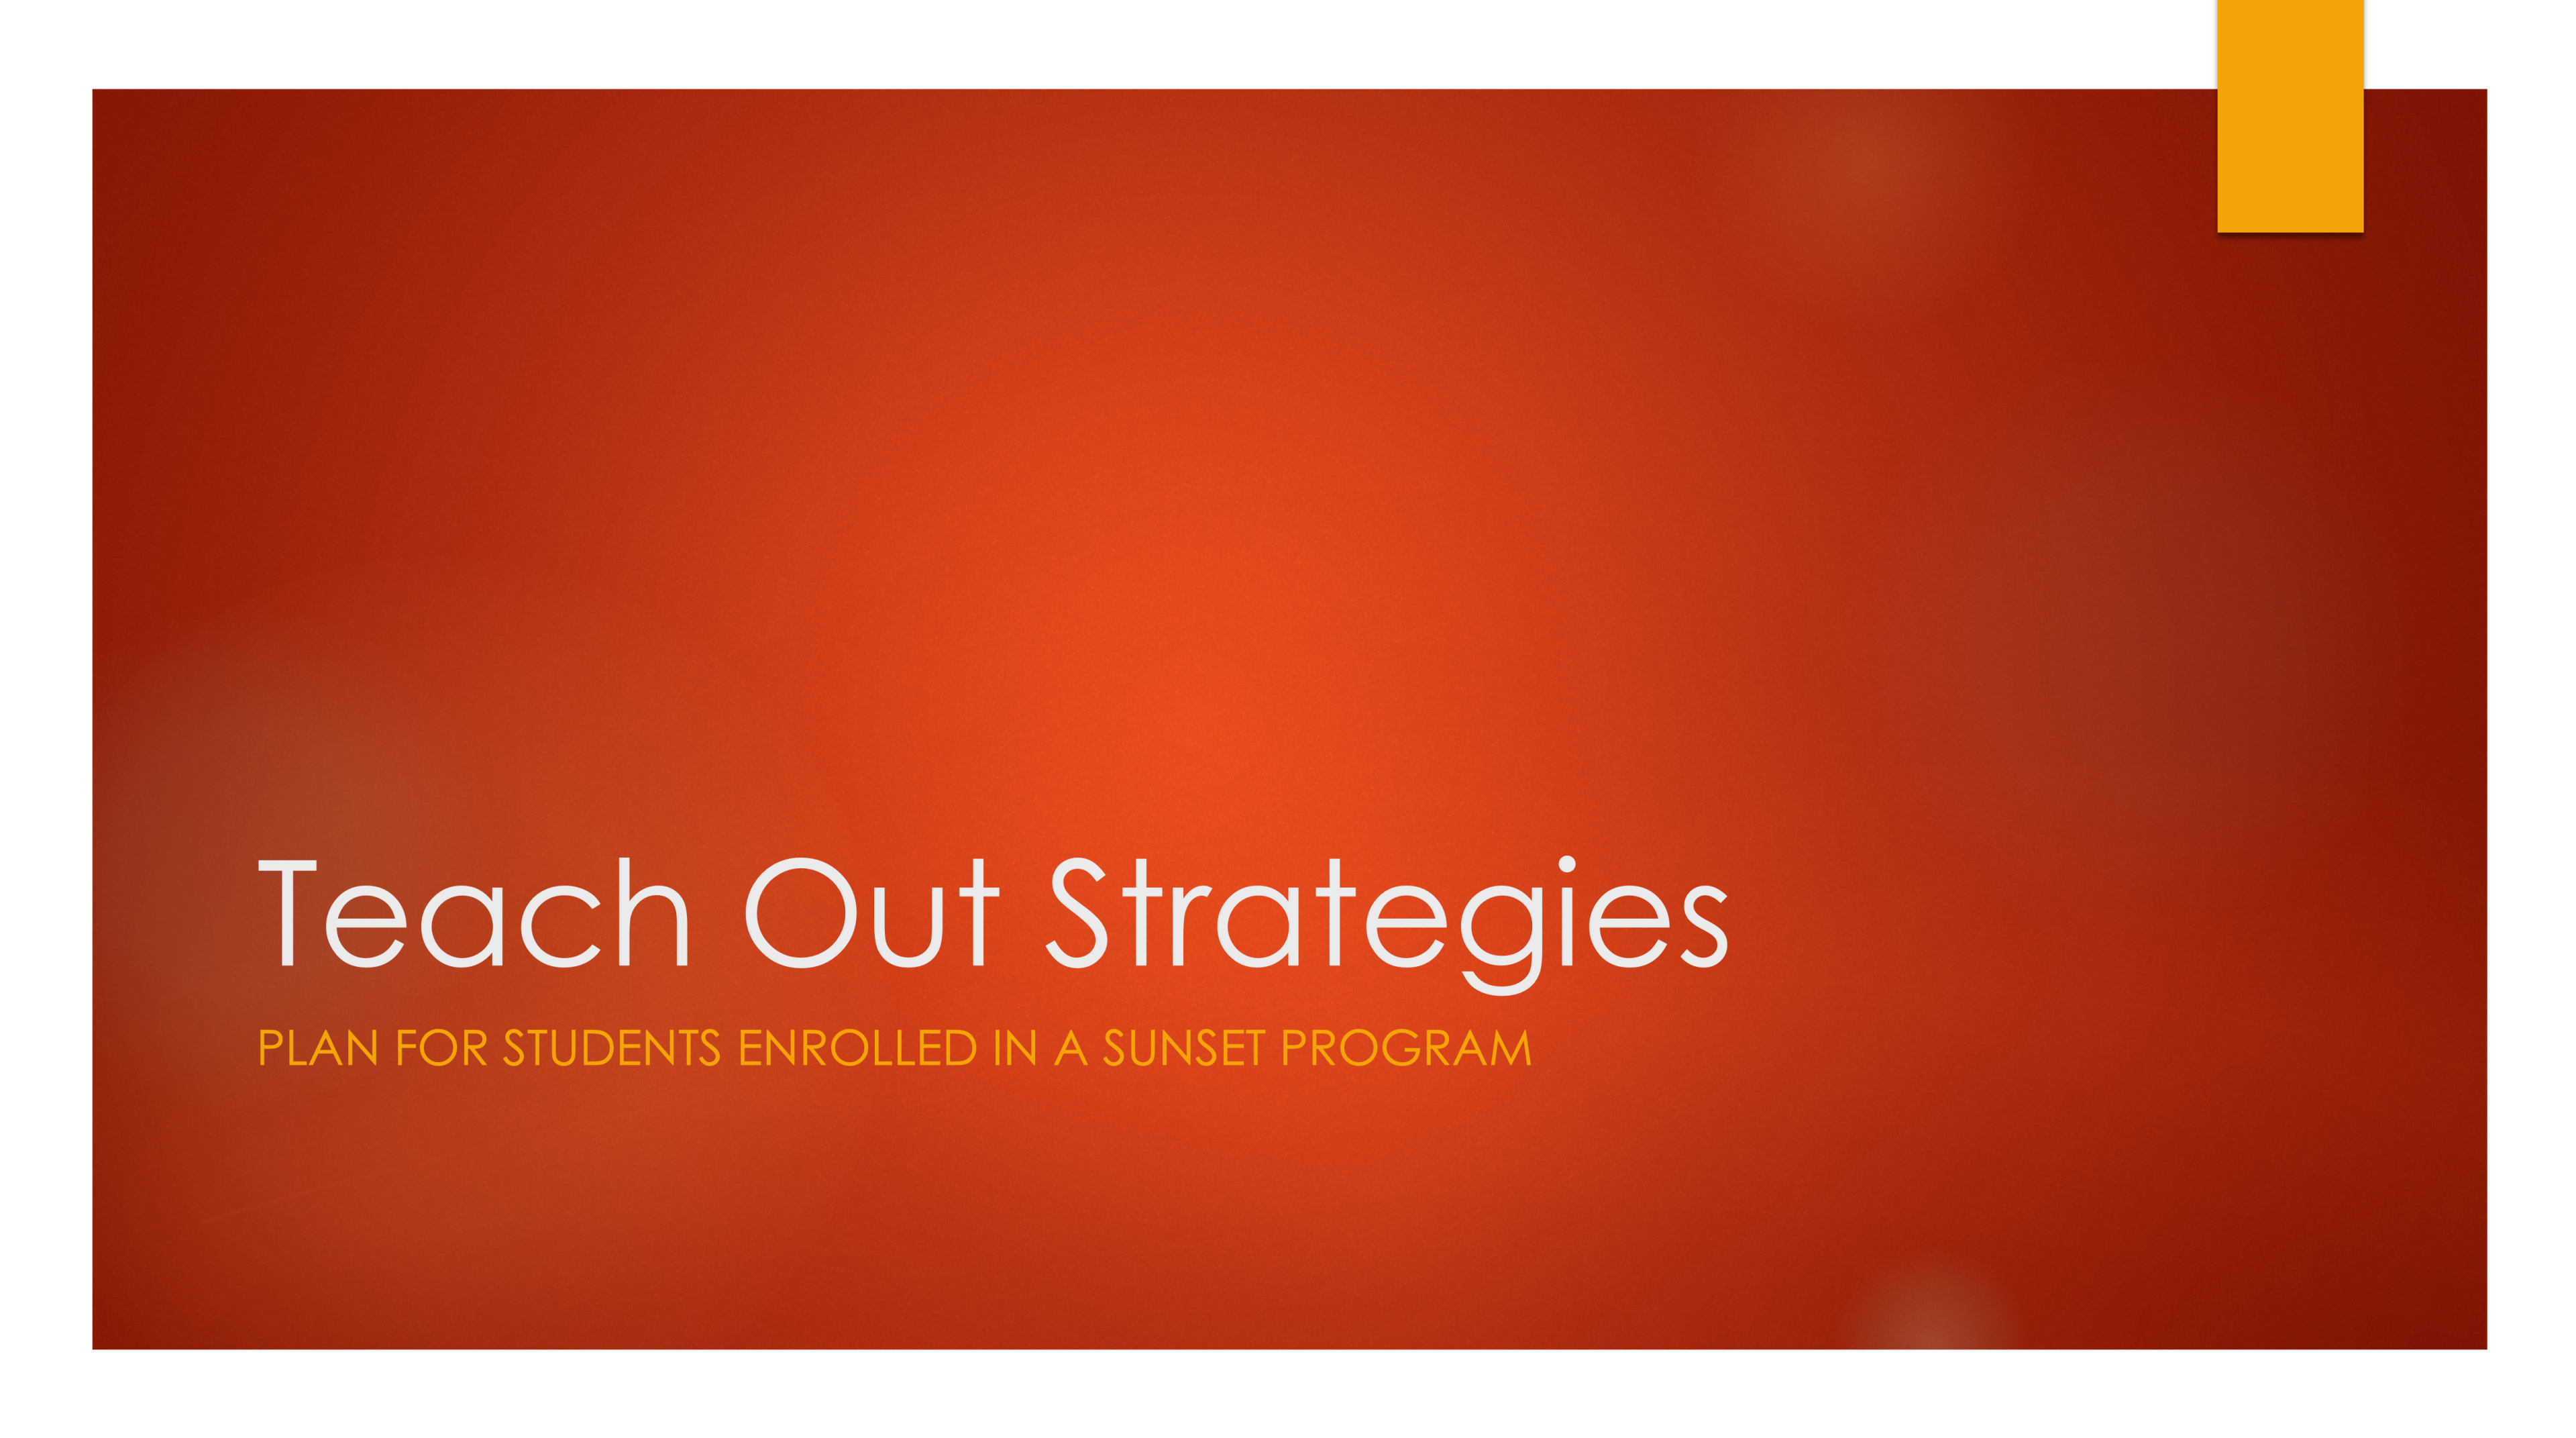 Teach Out Strategies Plan for Students Enrolled in a Sunset Program